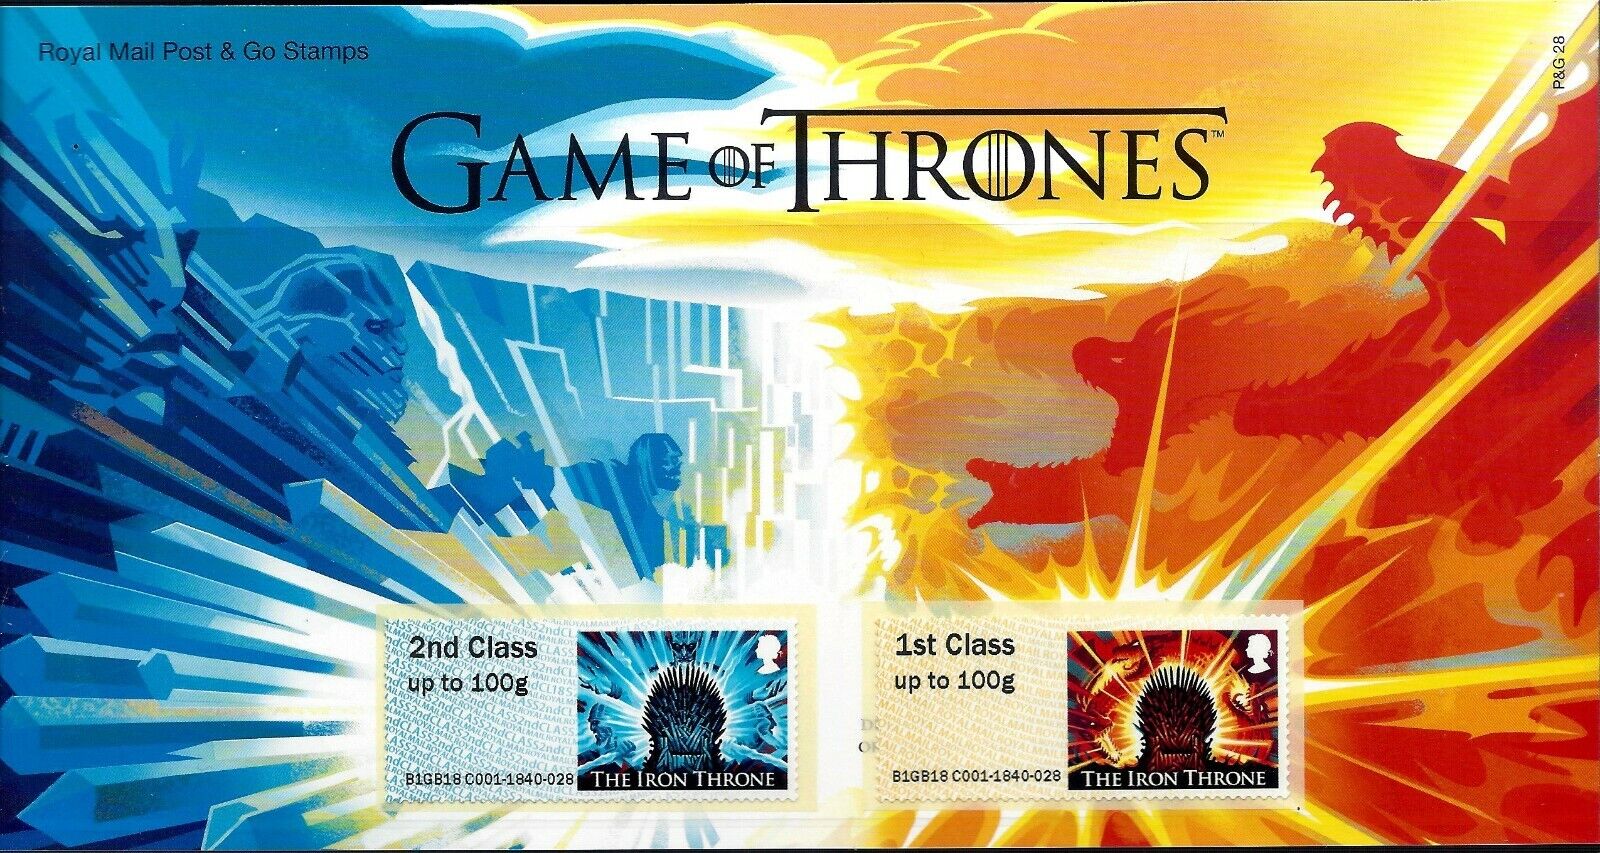 POST & GO 2018 GAME OF THRONES MAIL BY SEA POSTAL MUSEUM WINDSOR